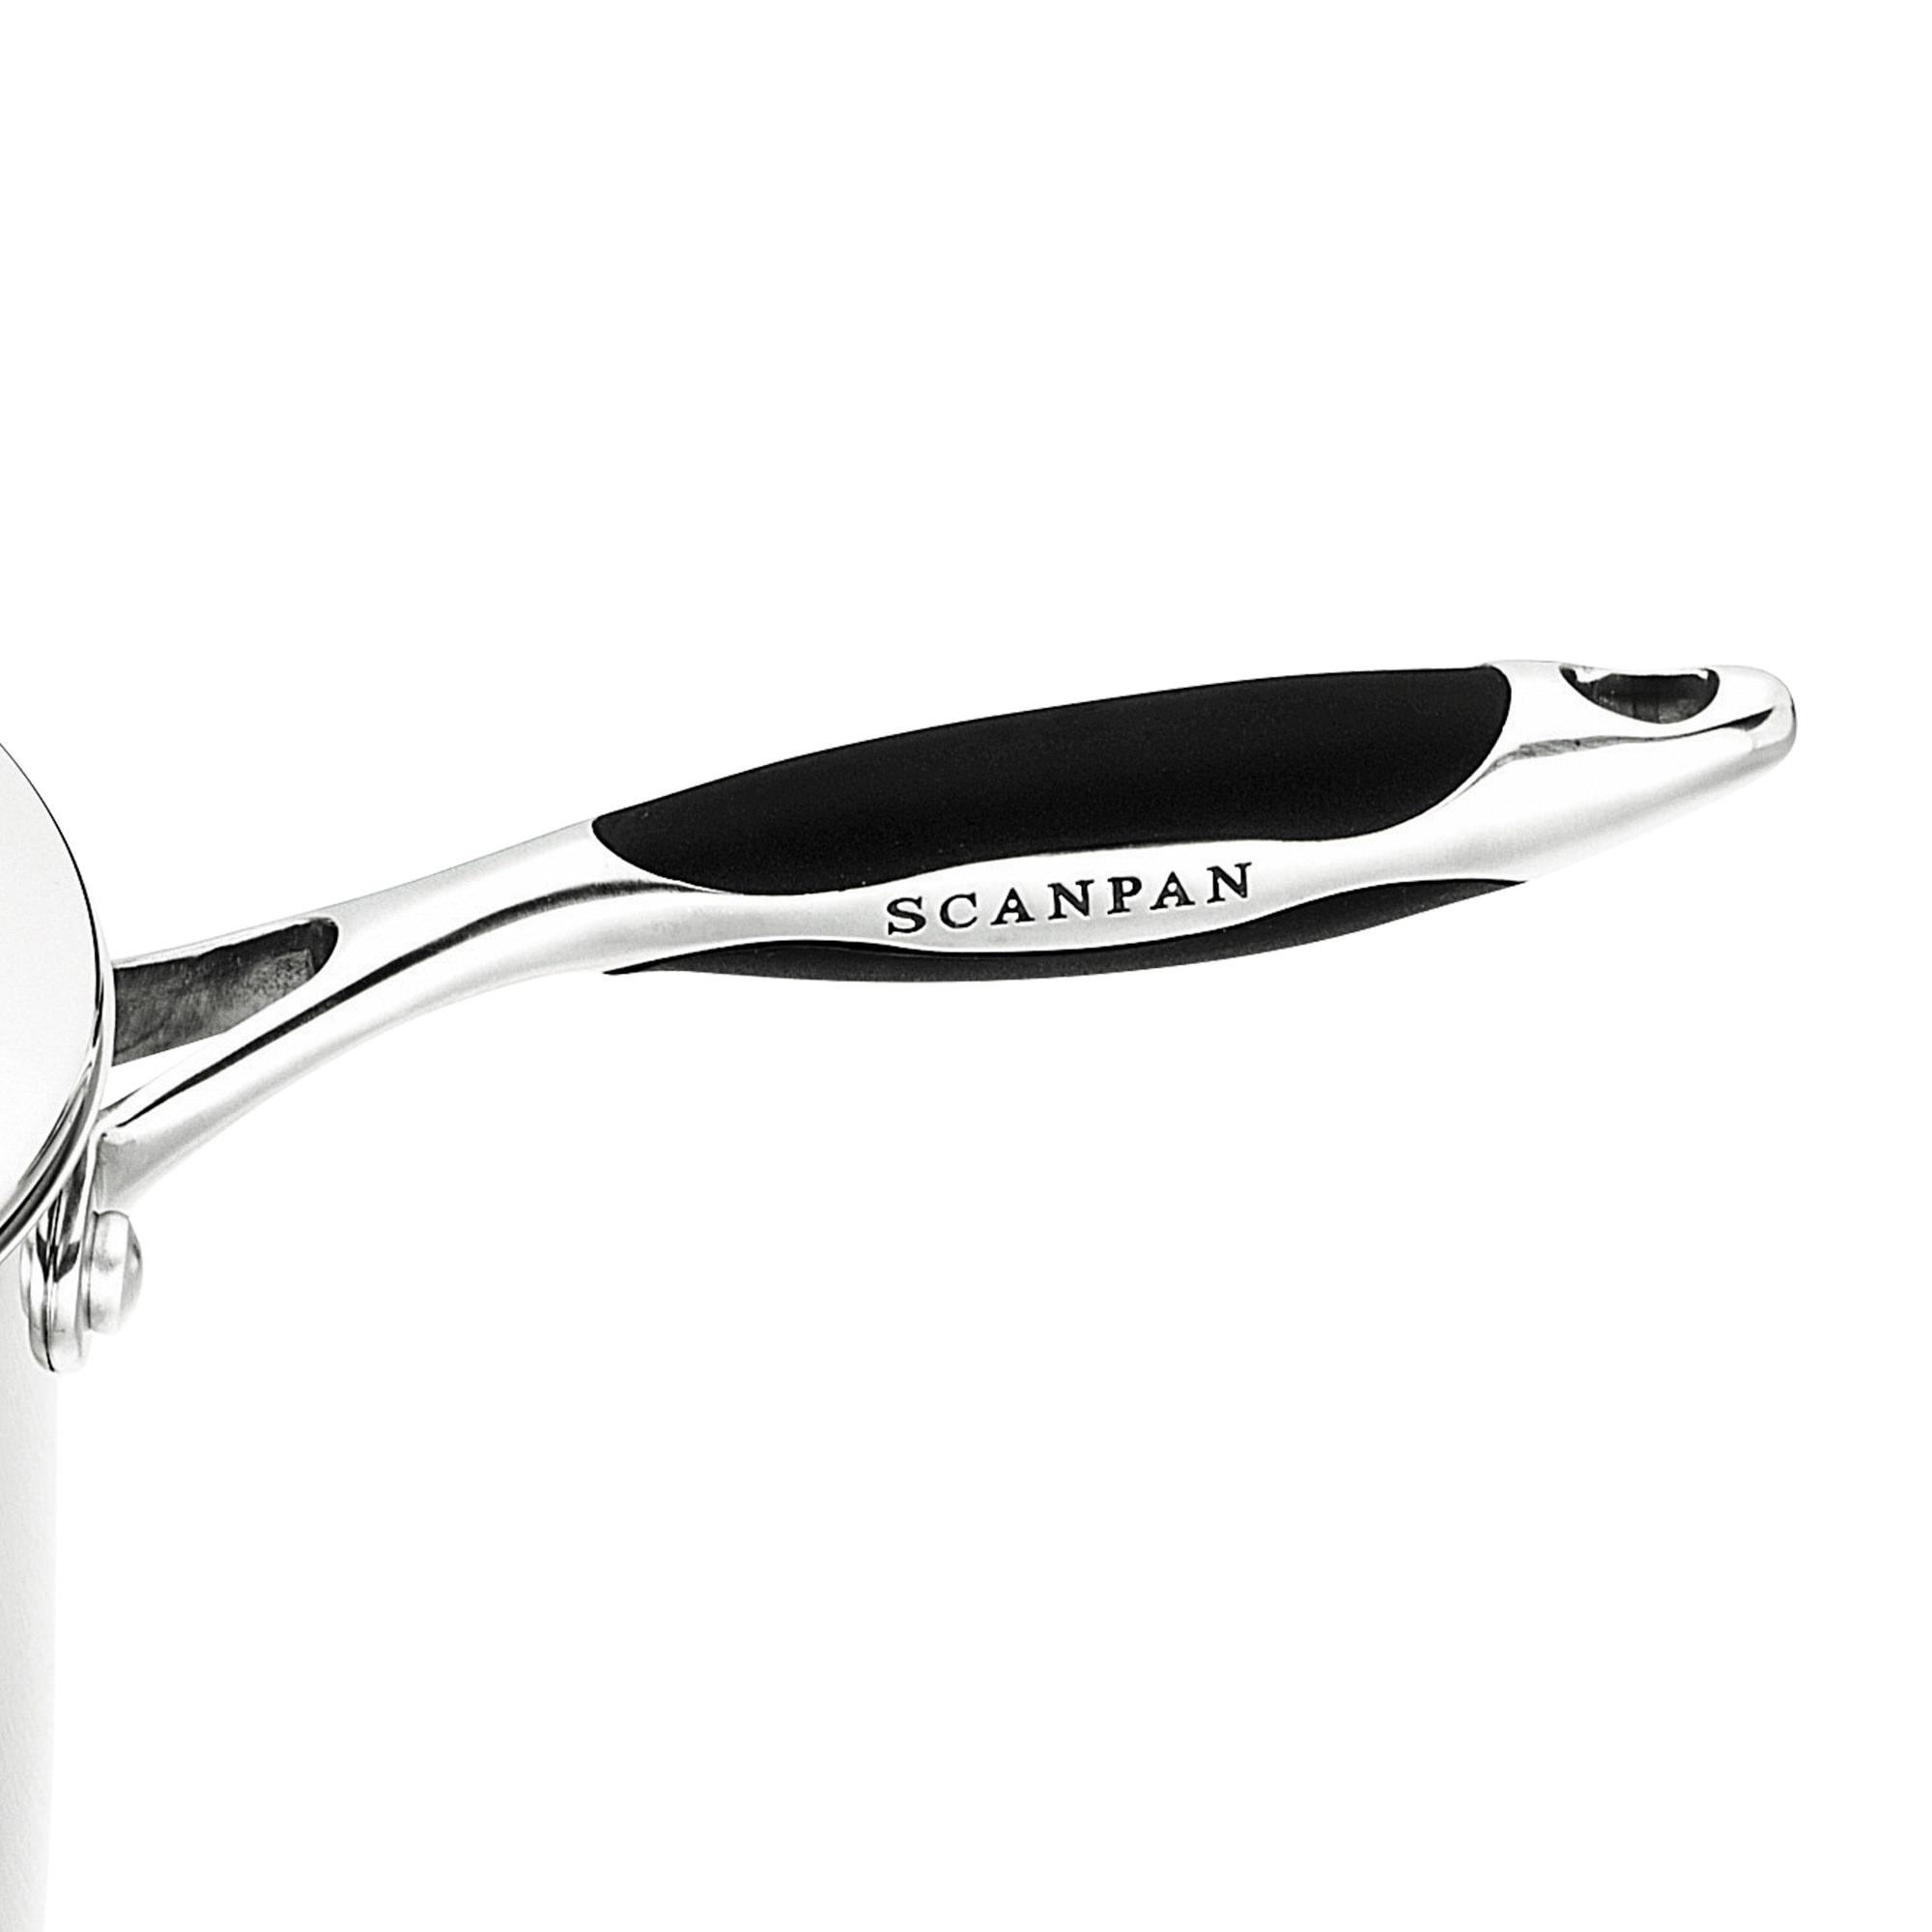 Scanpan Coppernox Stainless Steel Covered Saucepan 18cm - 2.5L Image 3